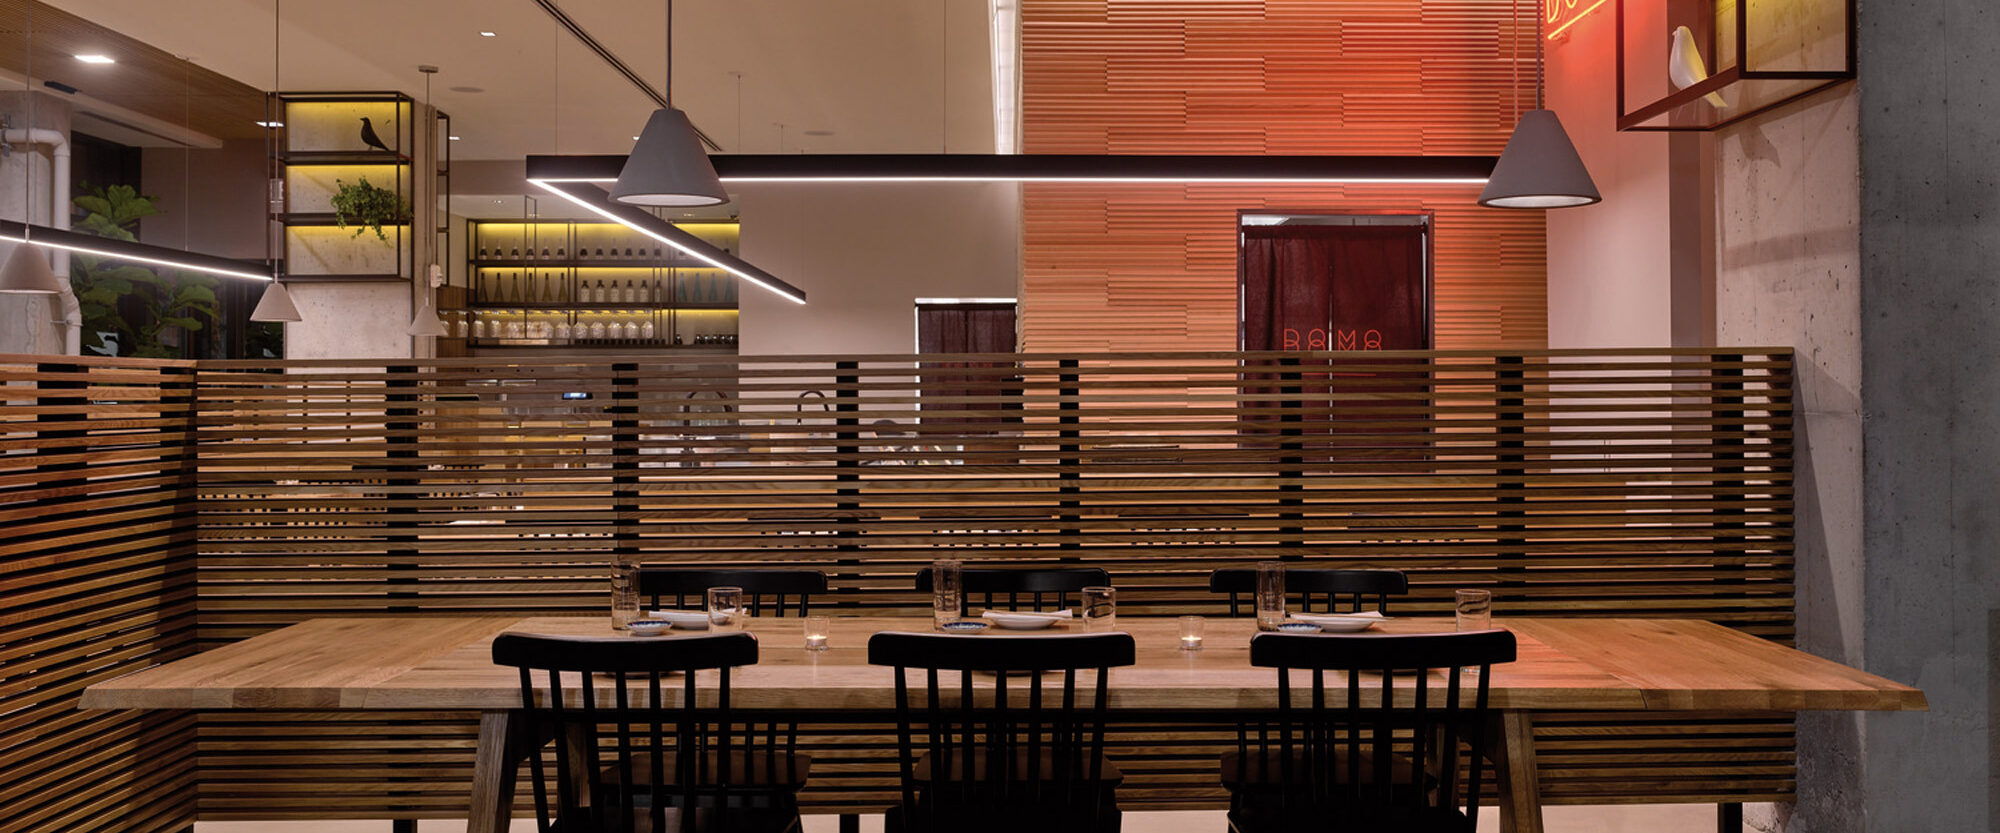 Modern dining space featuring a wooden communal table with black chairs, pendant lighting, and slatted wood partitions. Warm-toned backlighting accentuates the textured rear wall, creating a cozy, inviting atmosphere.